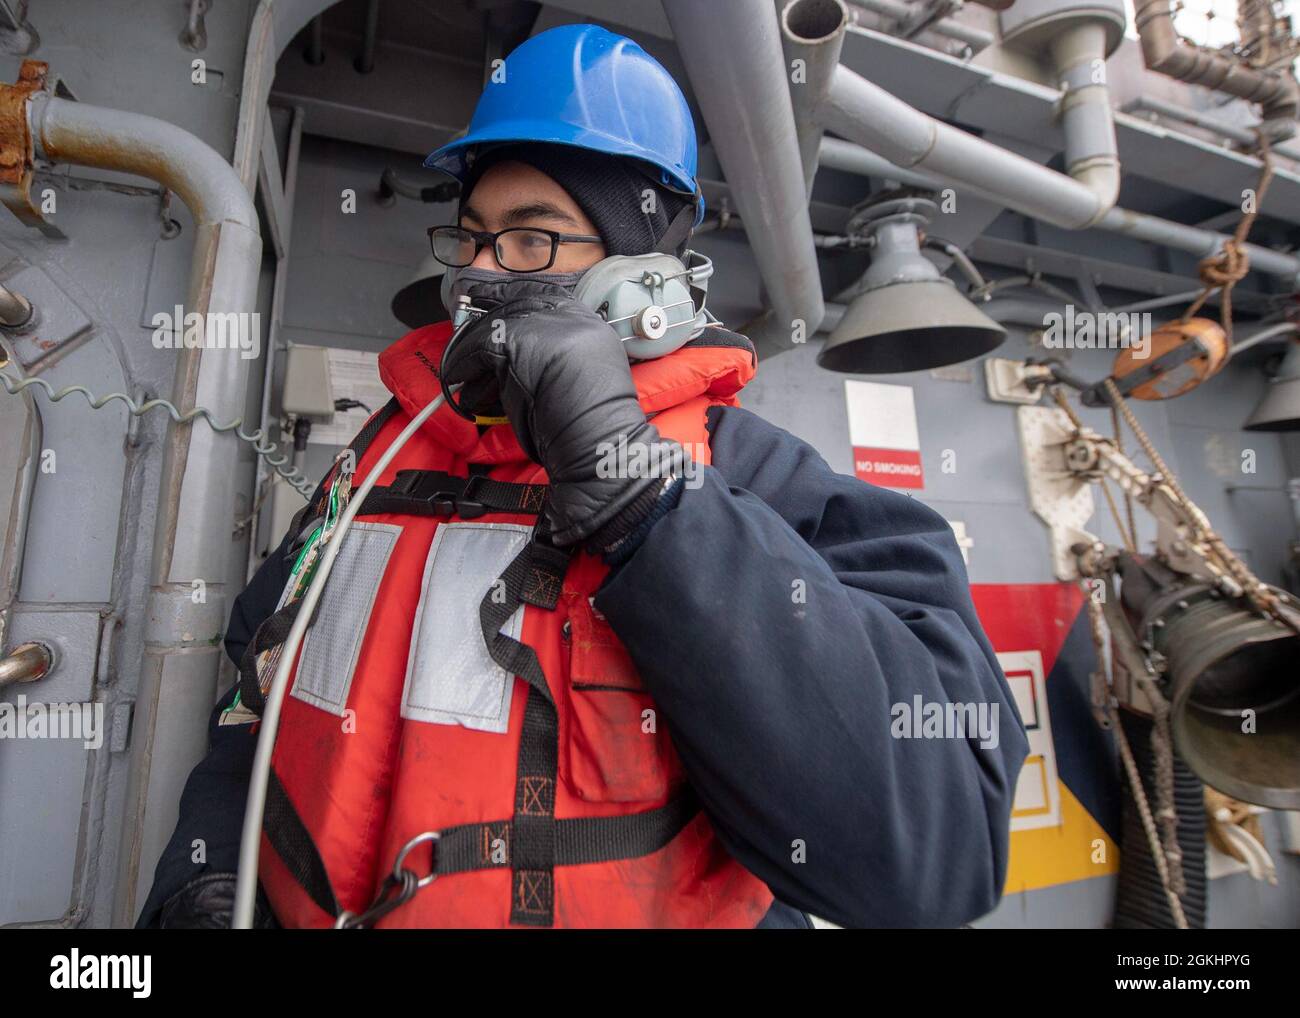 PACIFIC OCEAN (April 26, 2021) U.S. Navy Seaman Sebastian Guzman, from Phoenix, talks into a sound-powered phone aboard the Ticonderoga-class guided-missile cruiser USS Bunker Hill (CG 52) April 26, 2021. Bunker Hill, part of the Theodore Roosevelt Carrier Strike Group, is on a scheduled deployment conducting routine operations in U.S. 3rd Fleet. Stock Photo